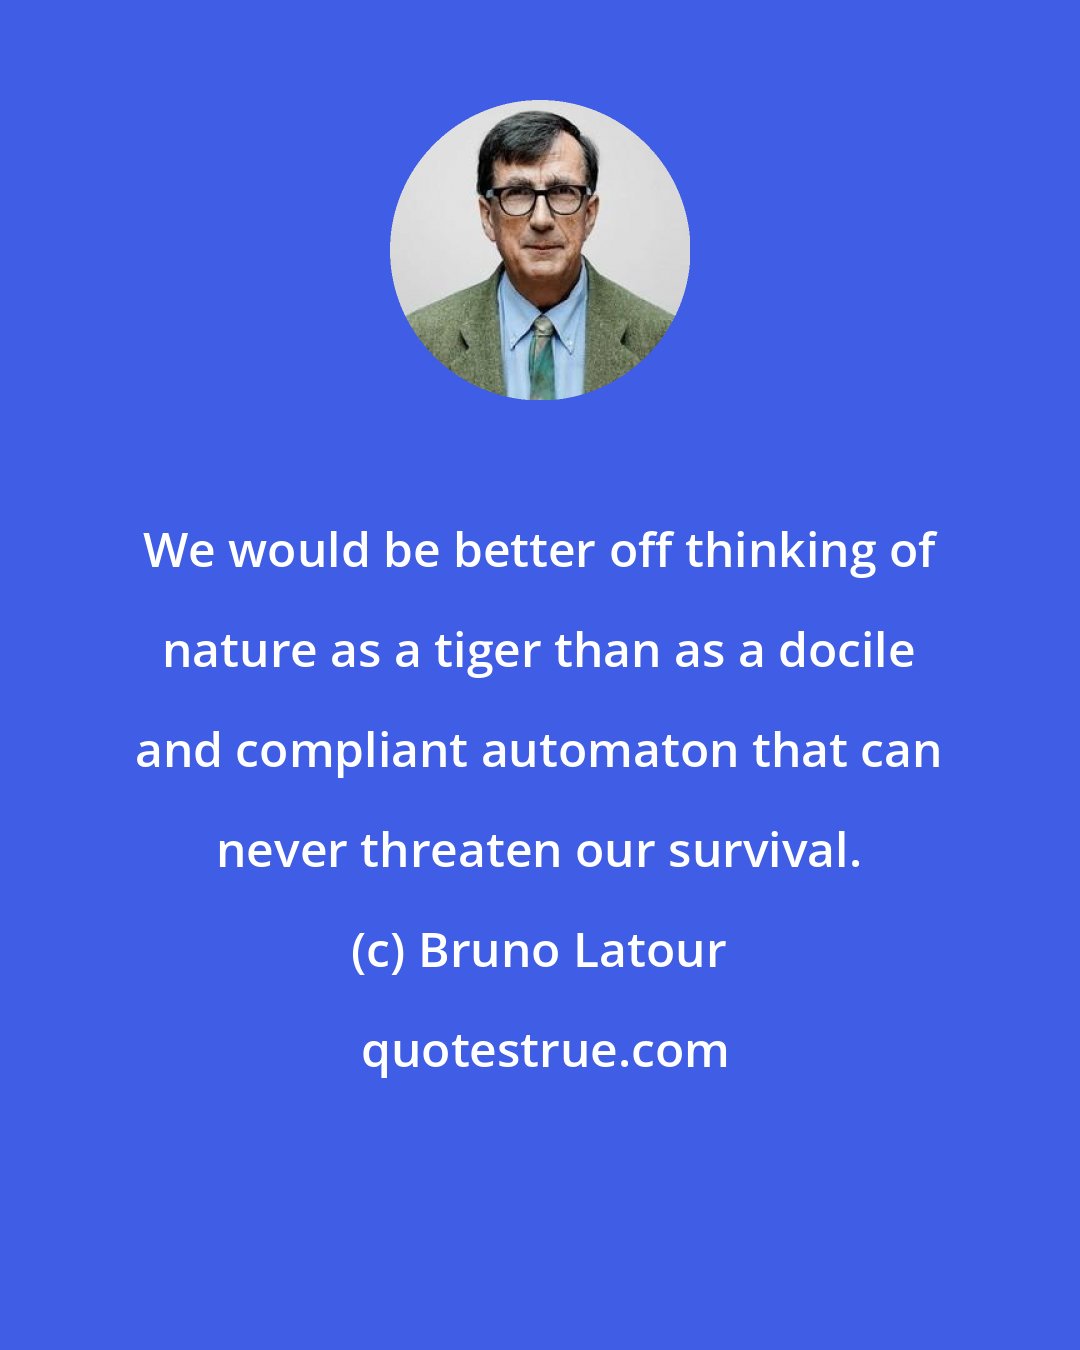 Bruno Latour: We would be better off thinking of nature as a tiger than as a docile and compliant automaton that can never threaten our survival.